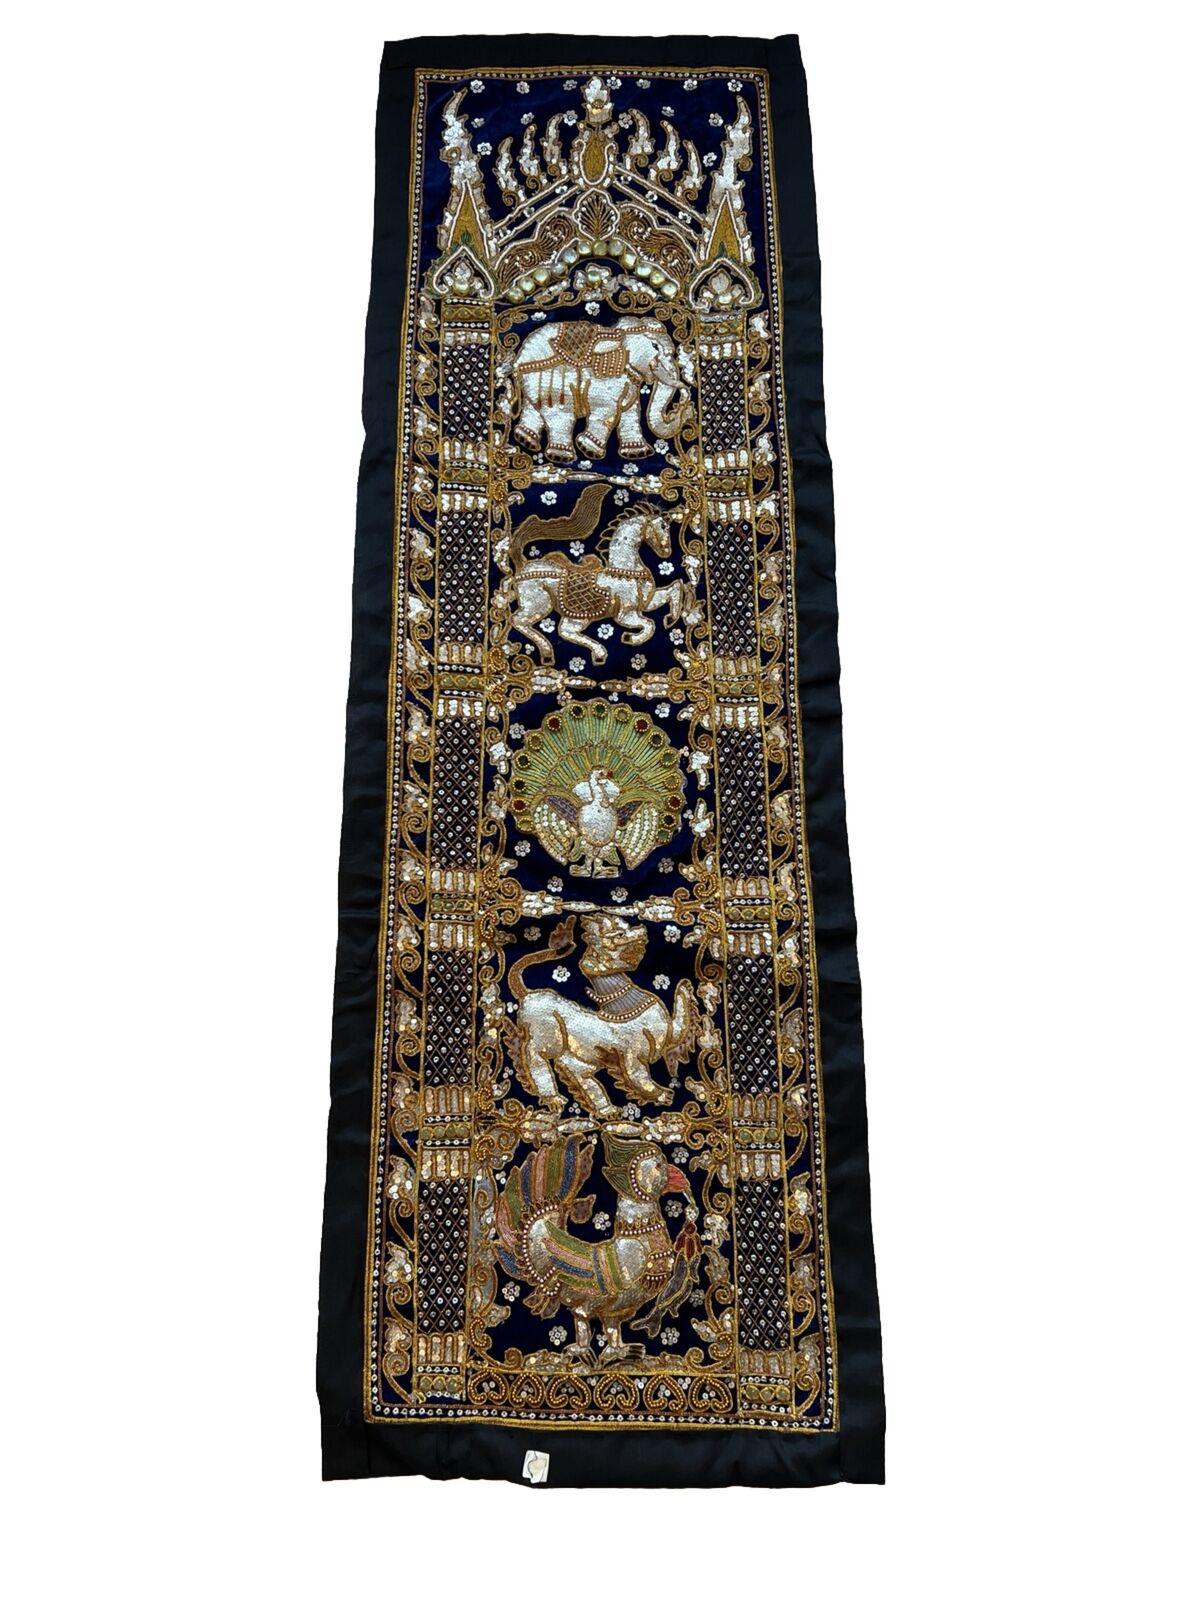 Thai elephants  Blue  vintage tapestry embroidered beads wall hanging decoration